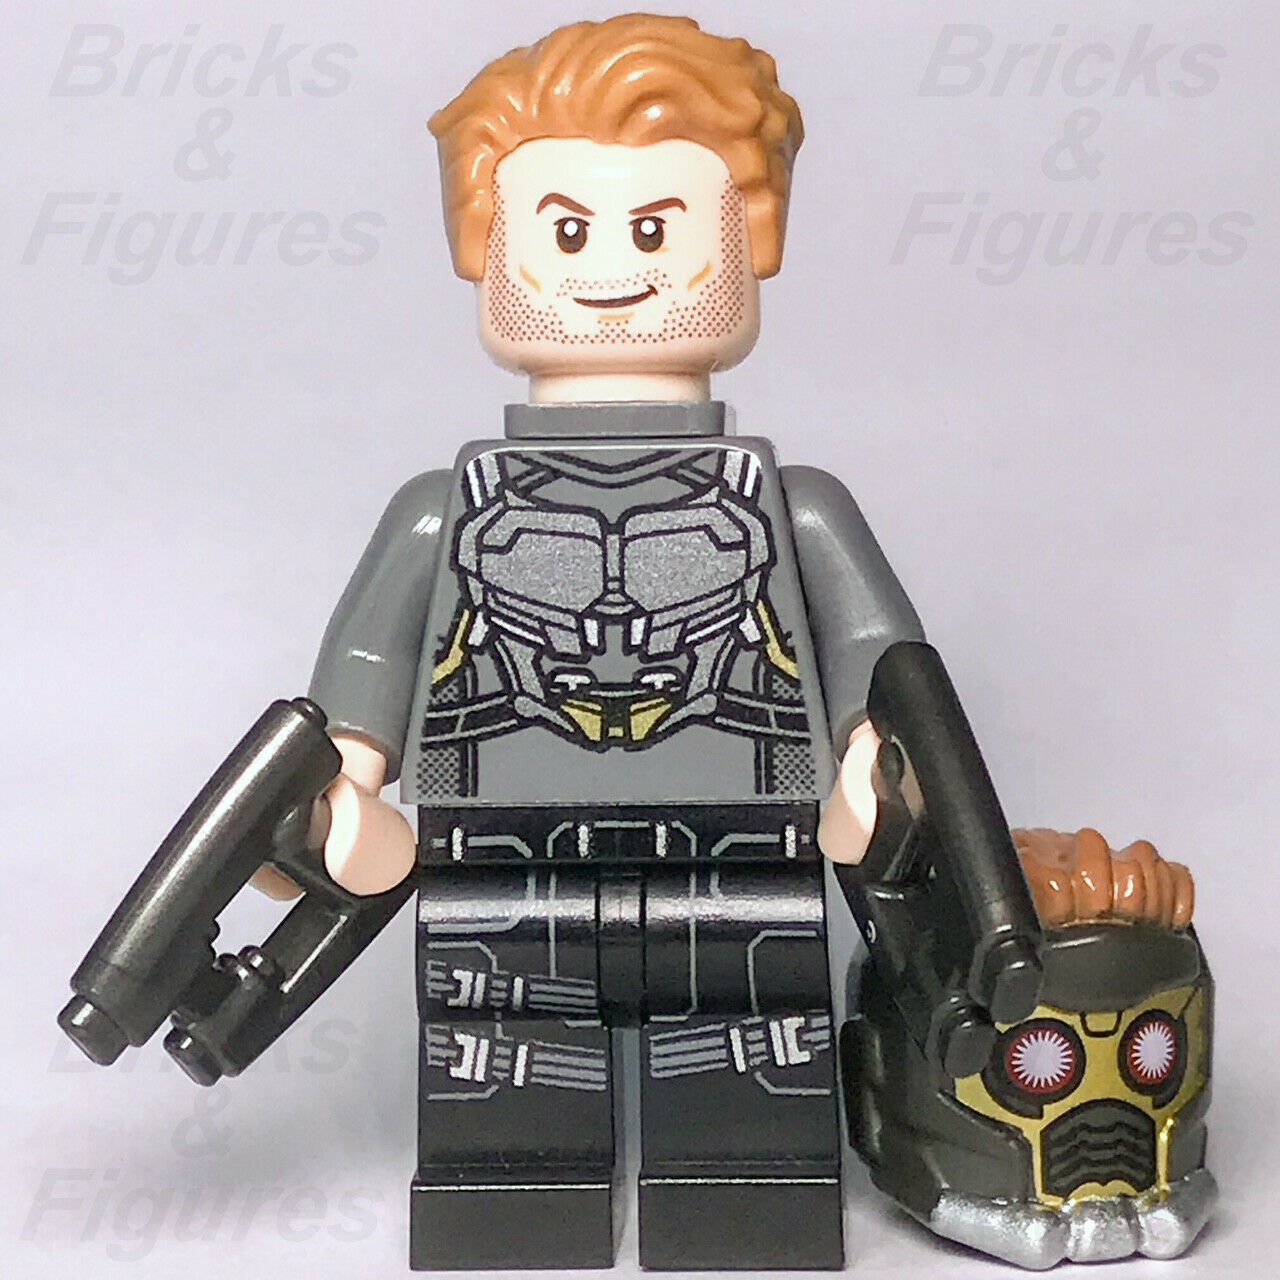 Marvel Super Heroes LEGO Star-Lord Guardians of the Galaxy Minifigure 76081 - Bricks & Figures